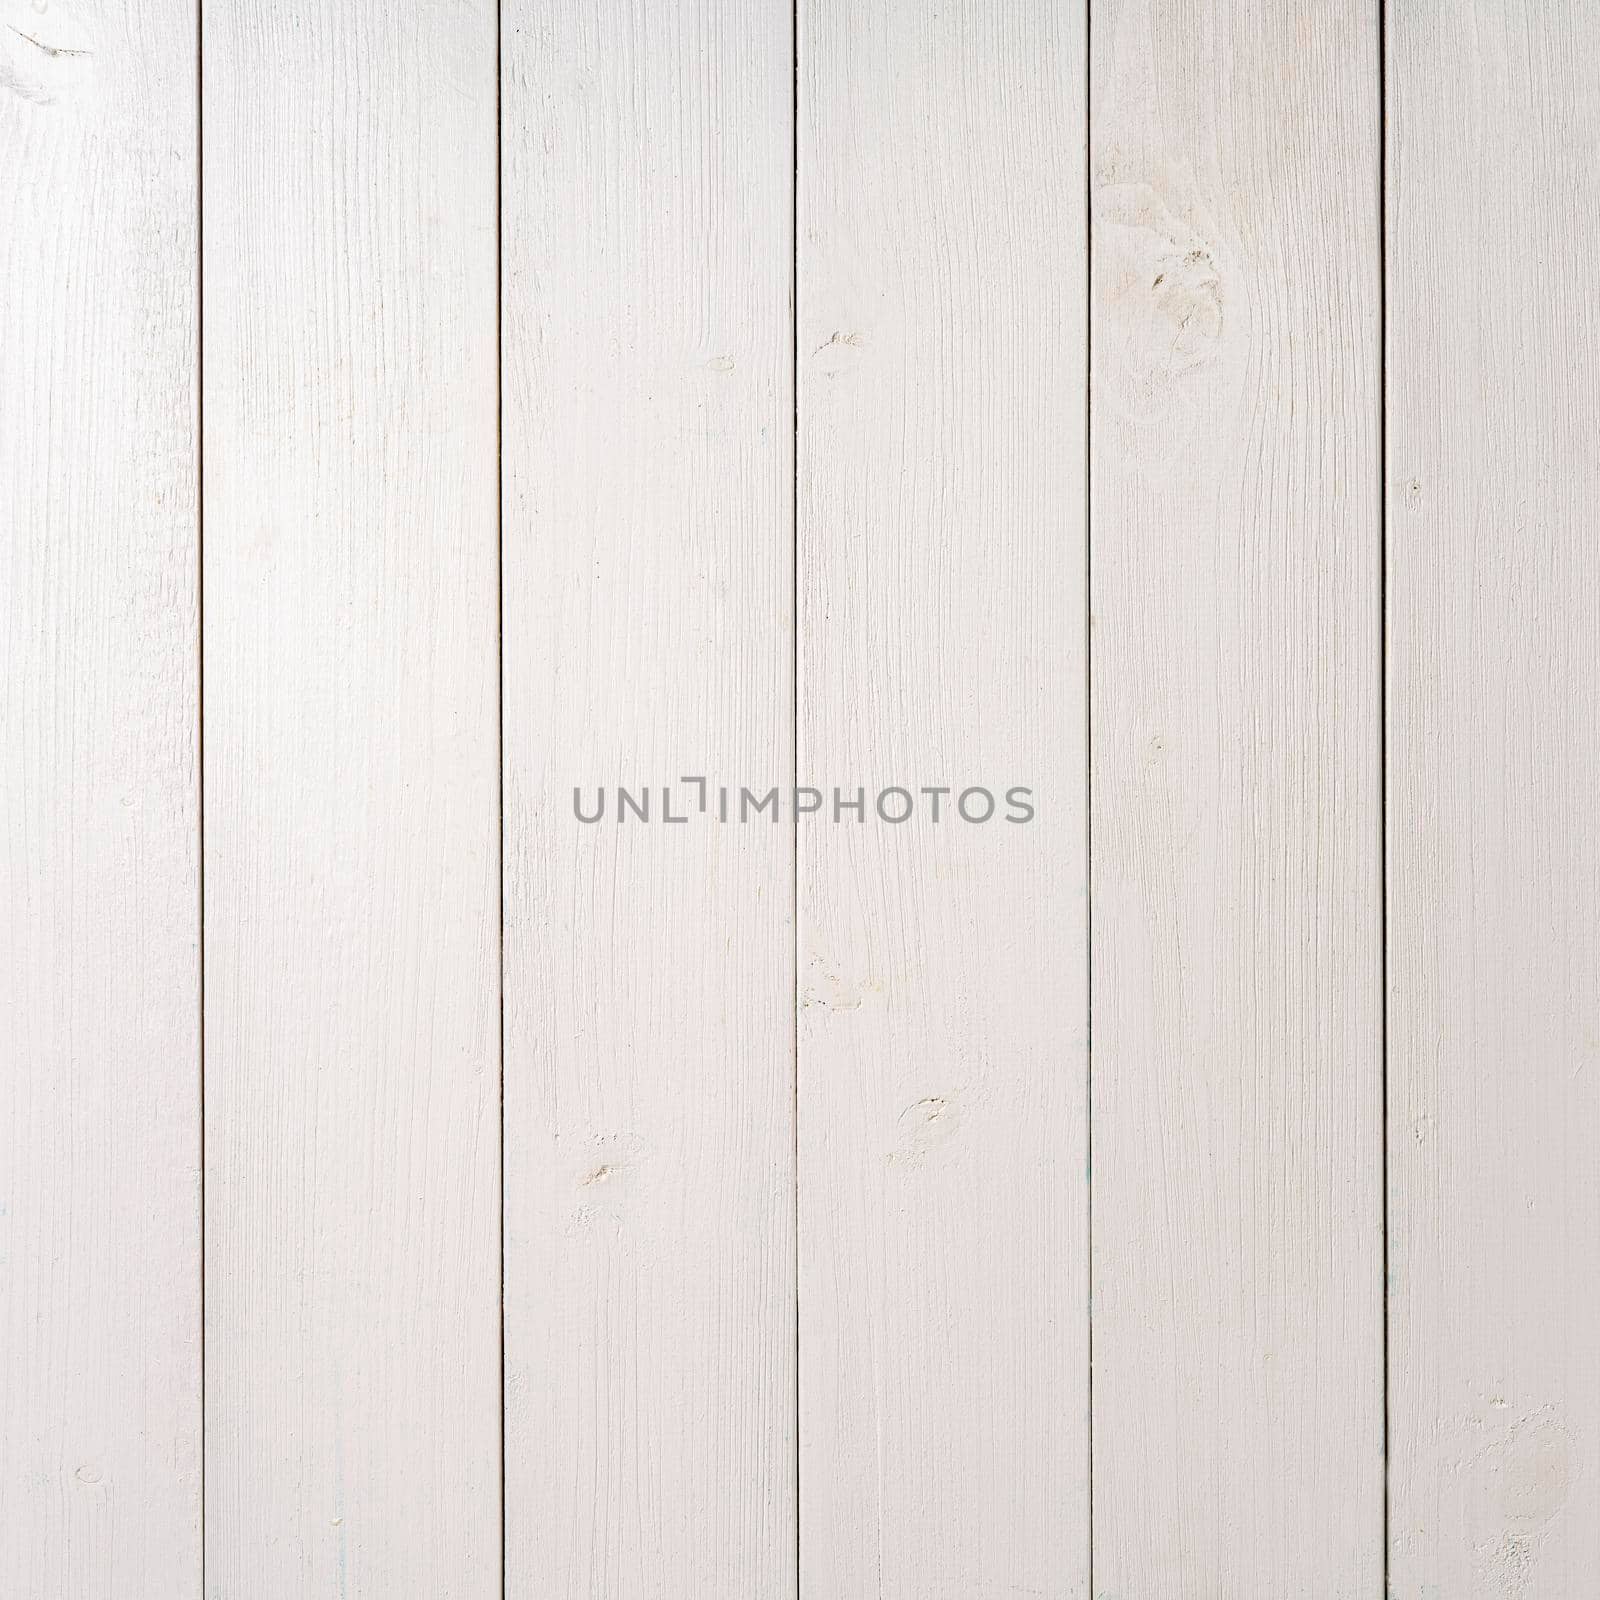 the empty wooden wall as a background